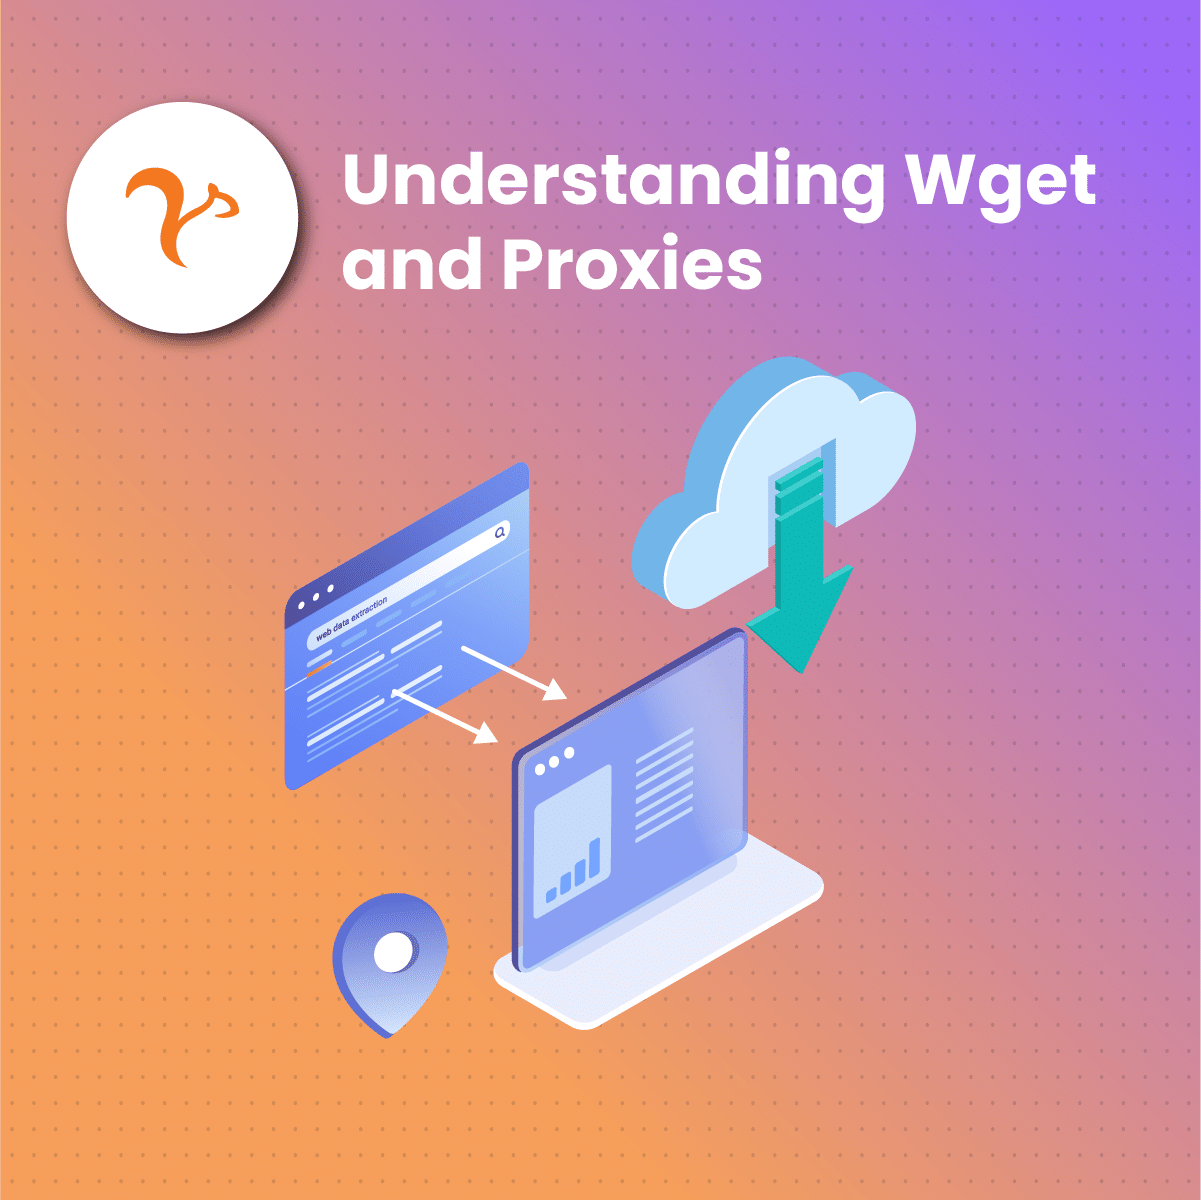 Understanding Wget and Proxies